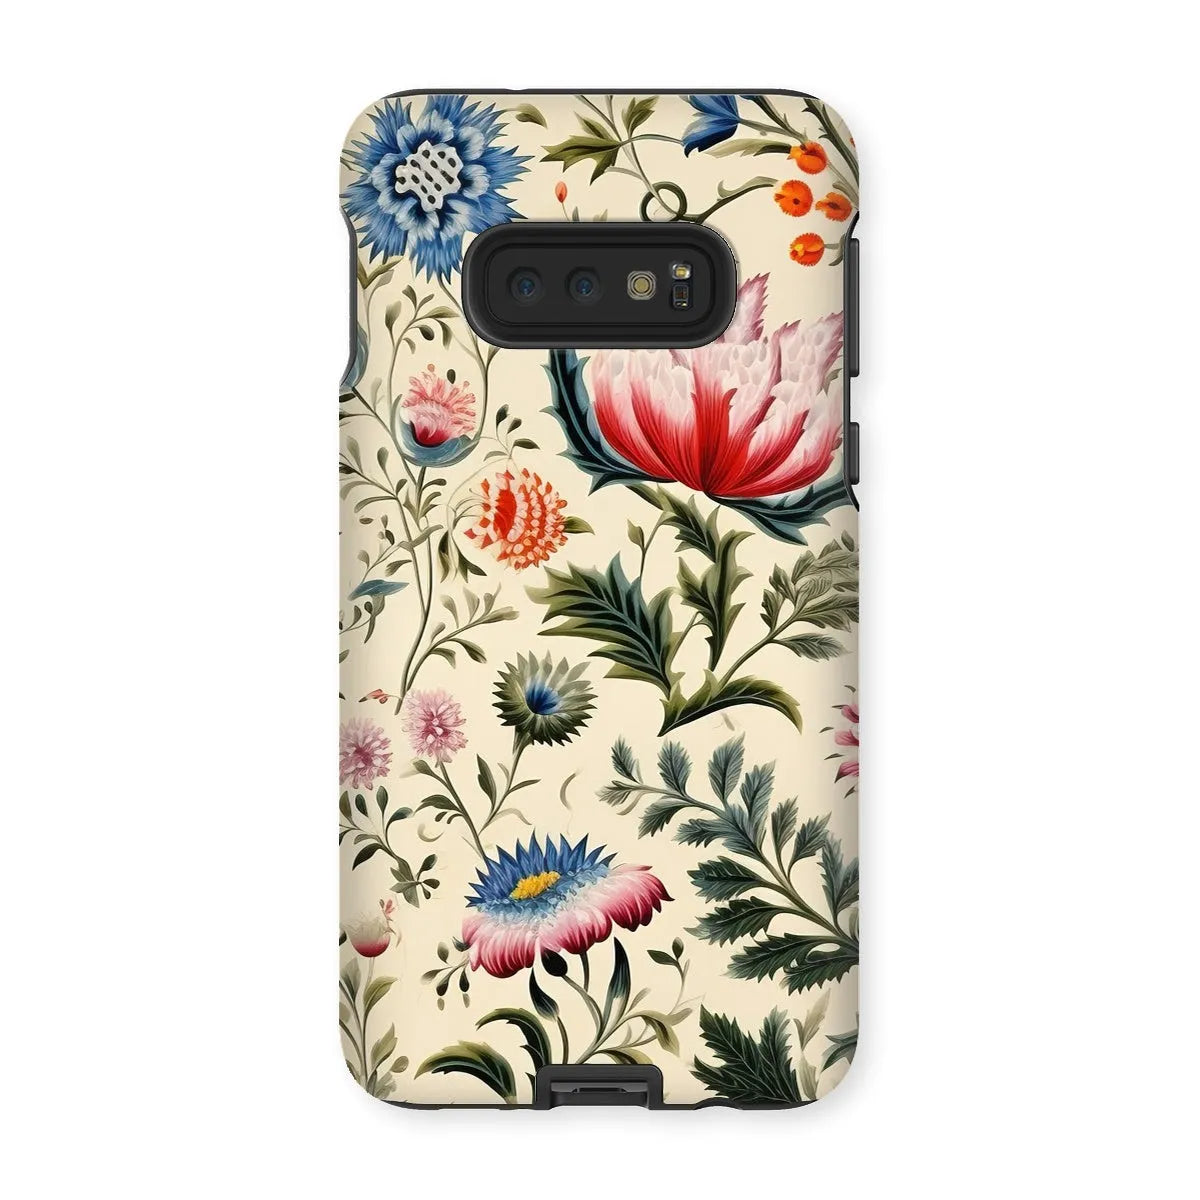 Wildflower Hoopla - Floral Garden Aesthetic Phone Case - Samsung Galaxy S10e / Matte - Mobile Phone Cases - Aesthetic